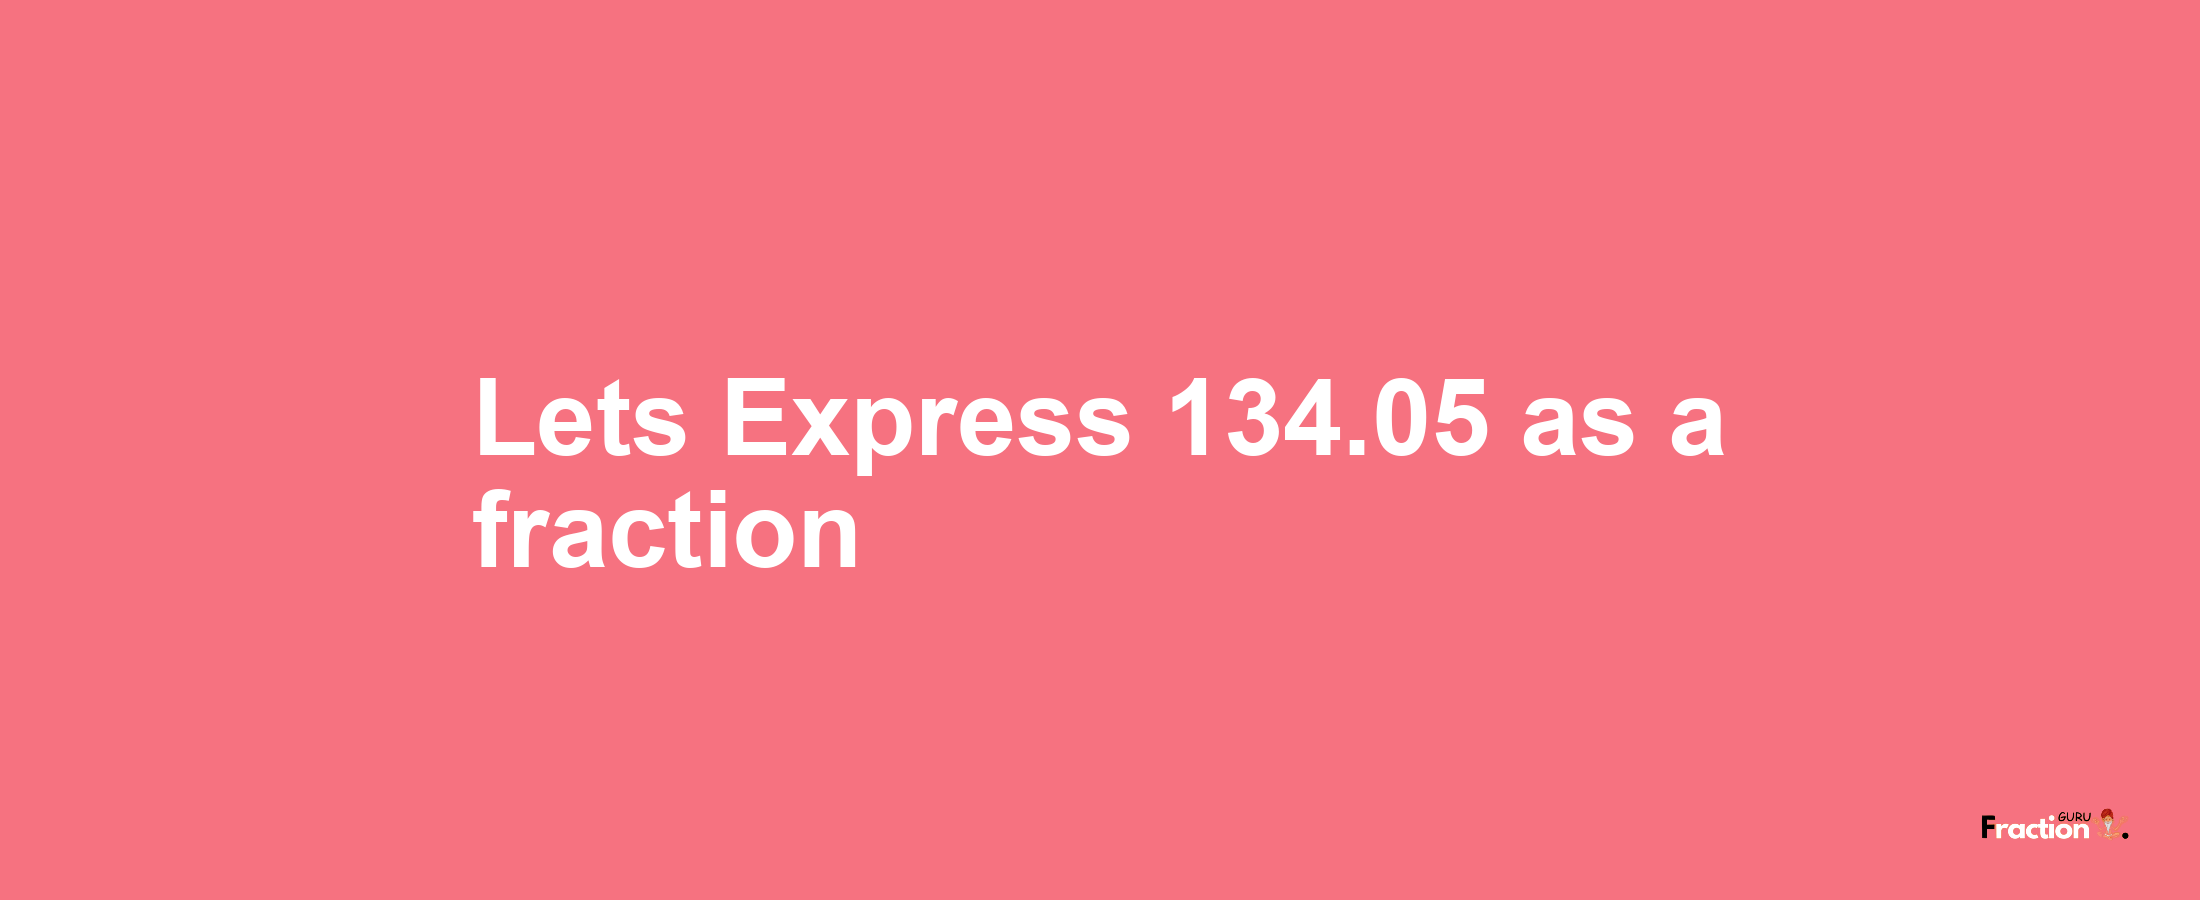 Lets Express 134.05 as afraction